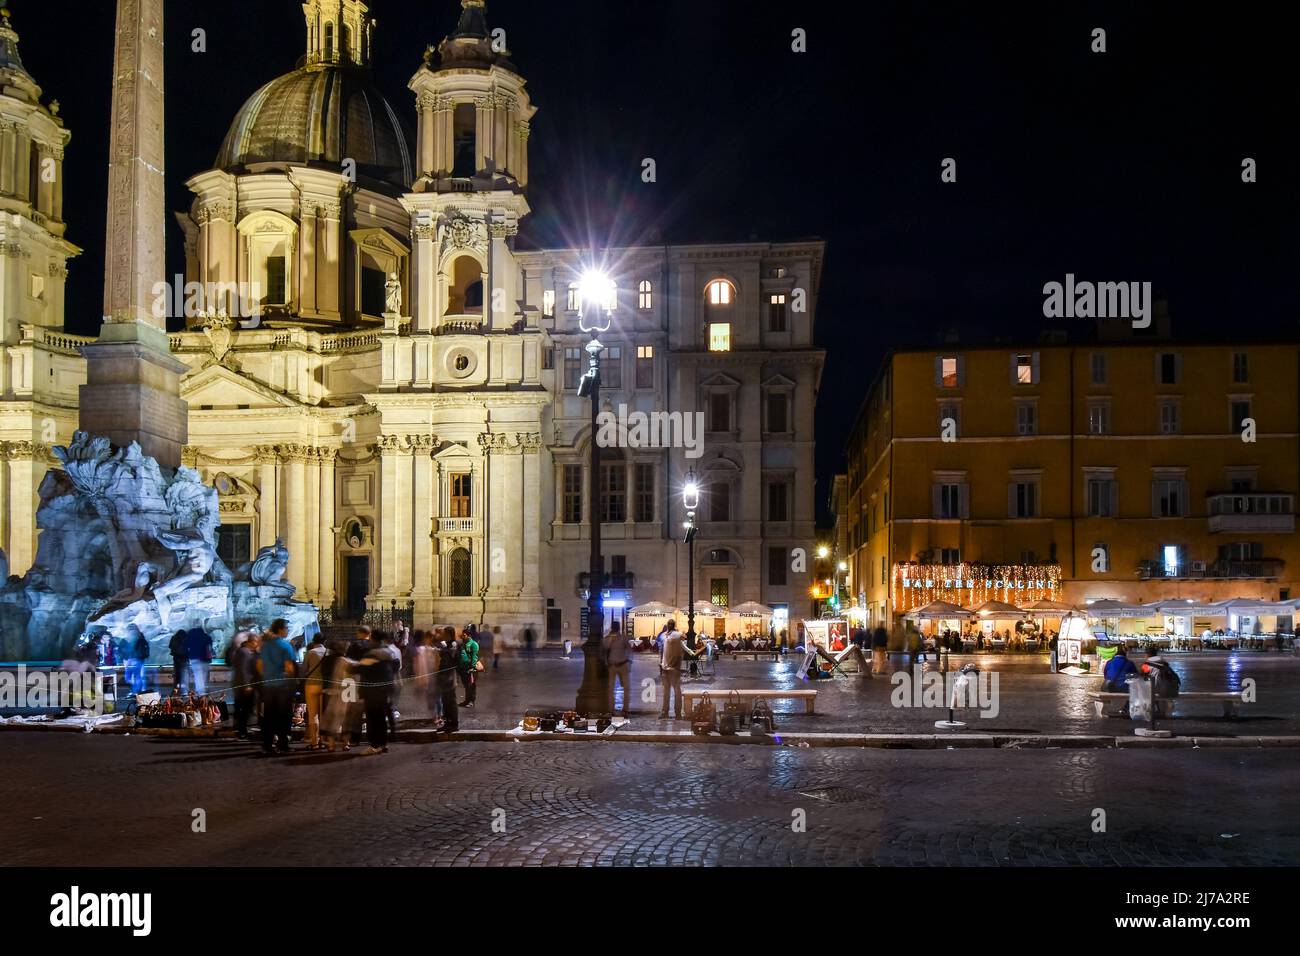 Night view of Piazza Navona with illuminated cafes, the Sant'Agnese in Agone Church and Fountain of the Four Rivers in Rome, Italy. Stock Photo